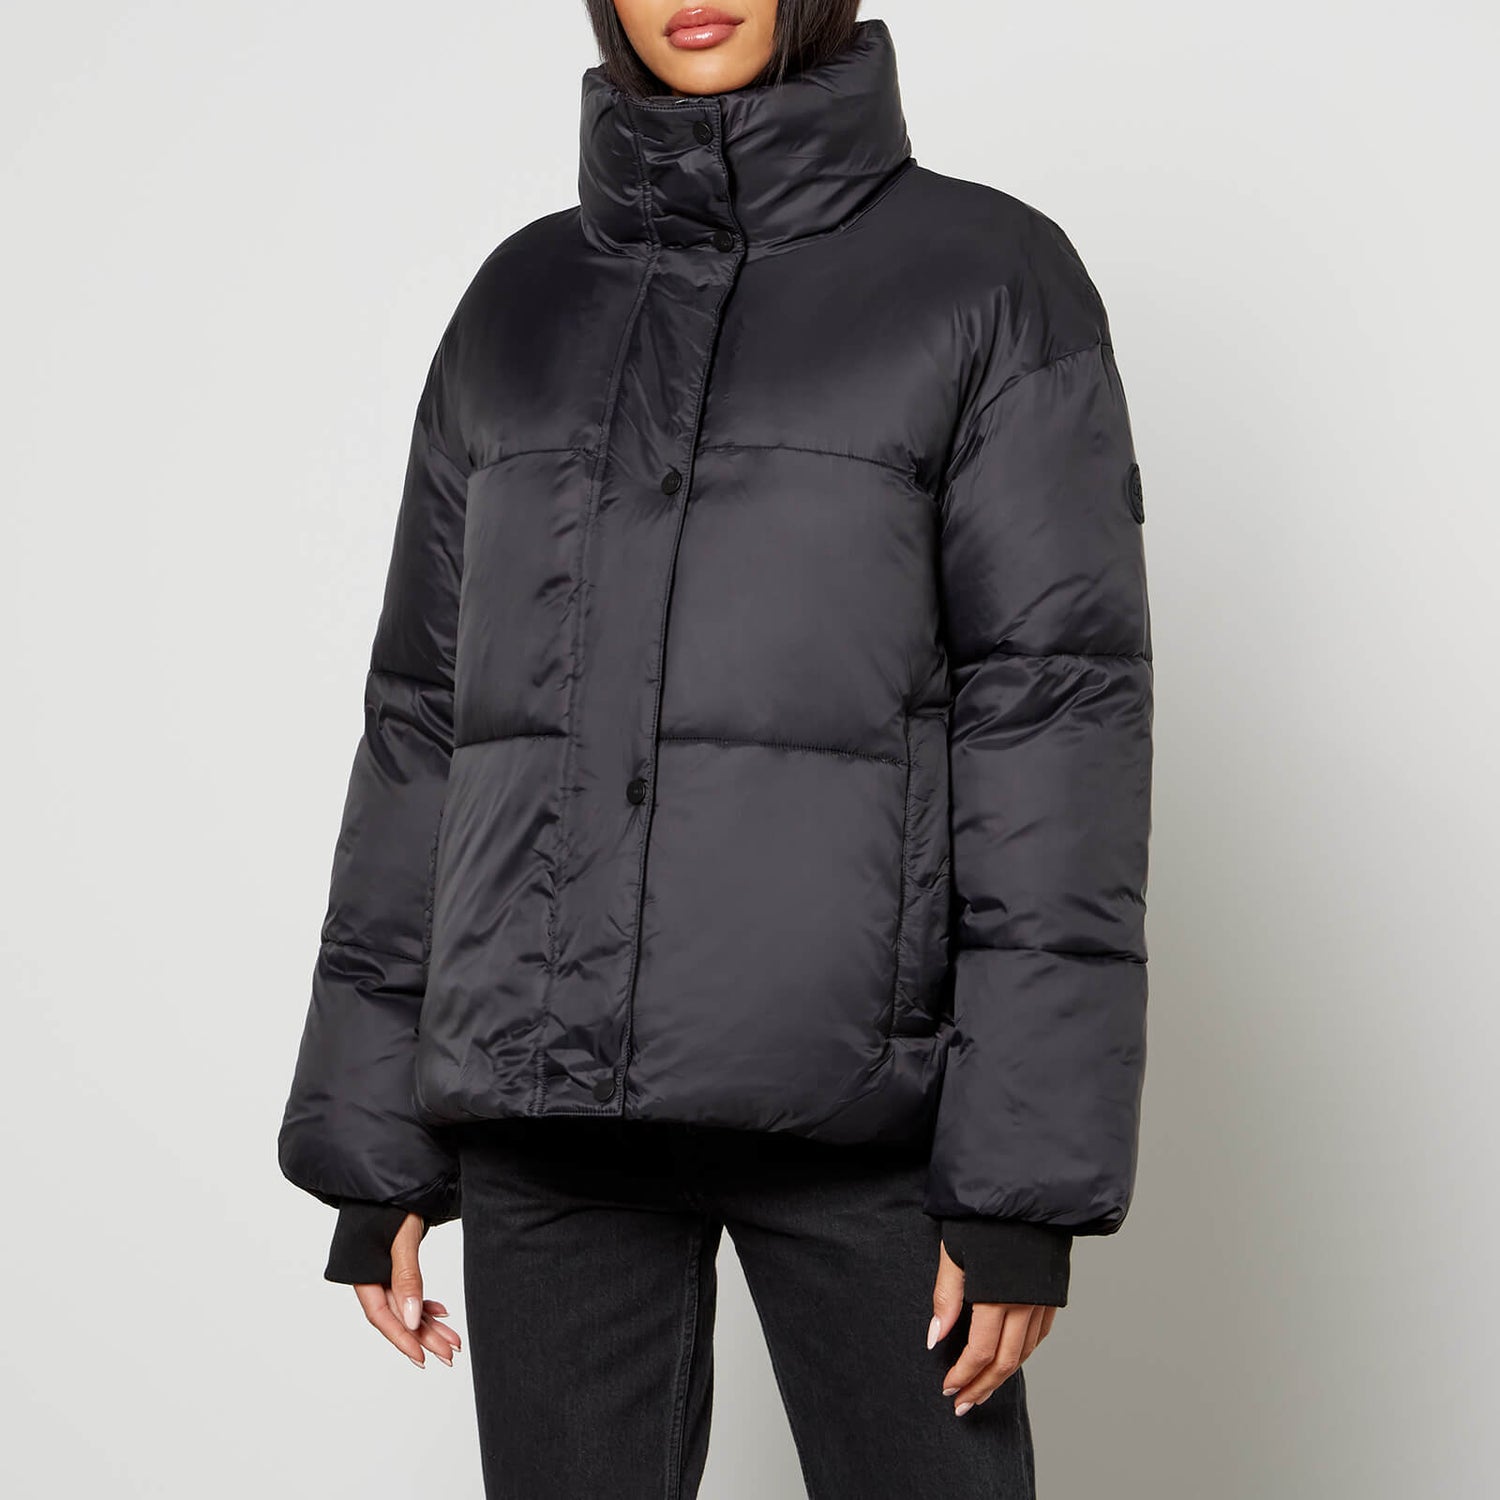 UGG Vickie Water Resistant Nylon Puffer Jacket - XL